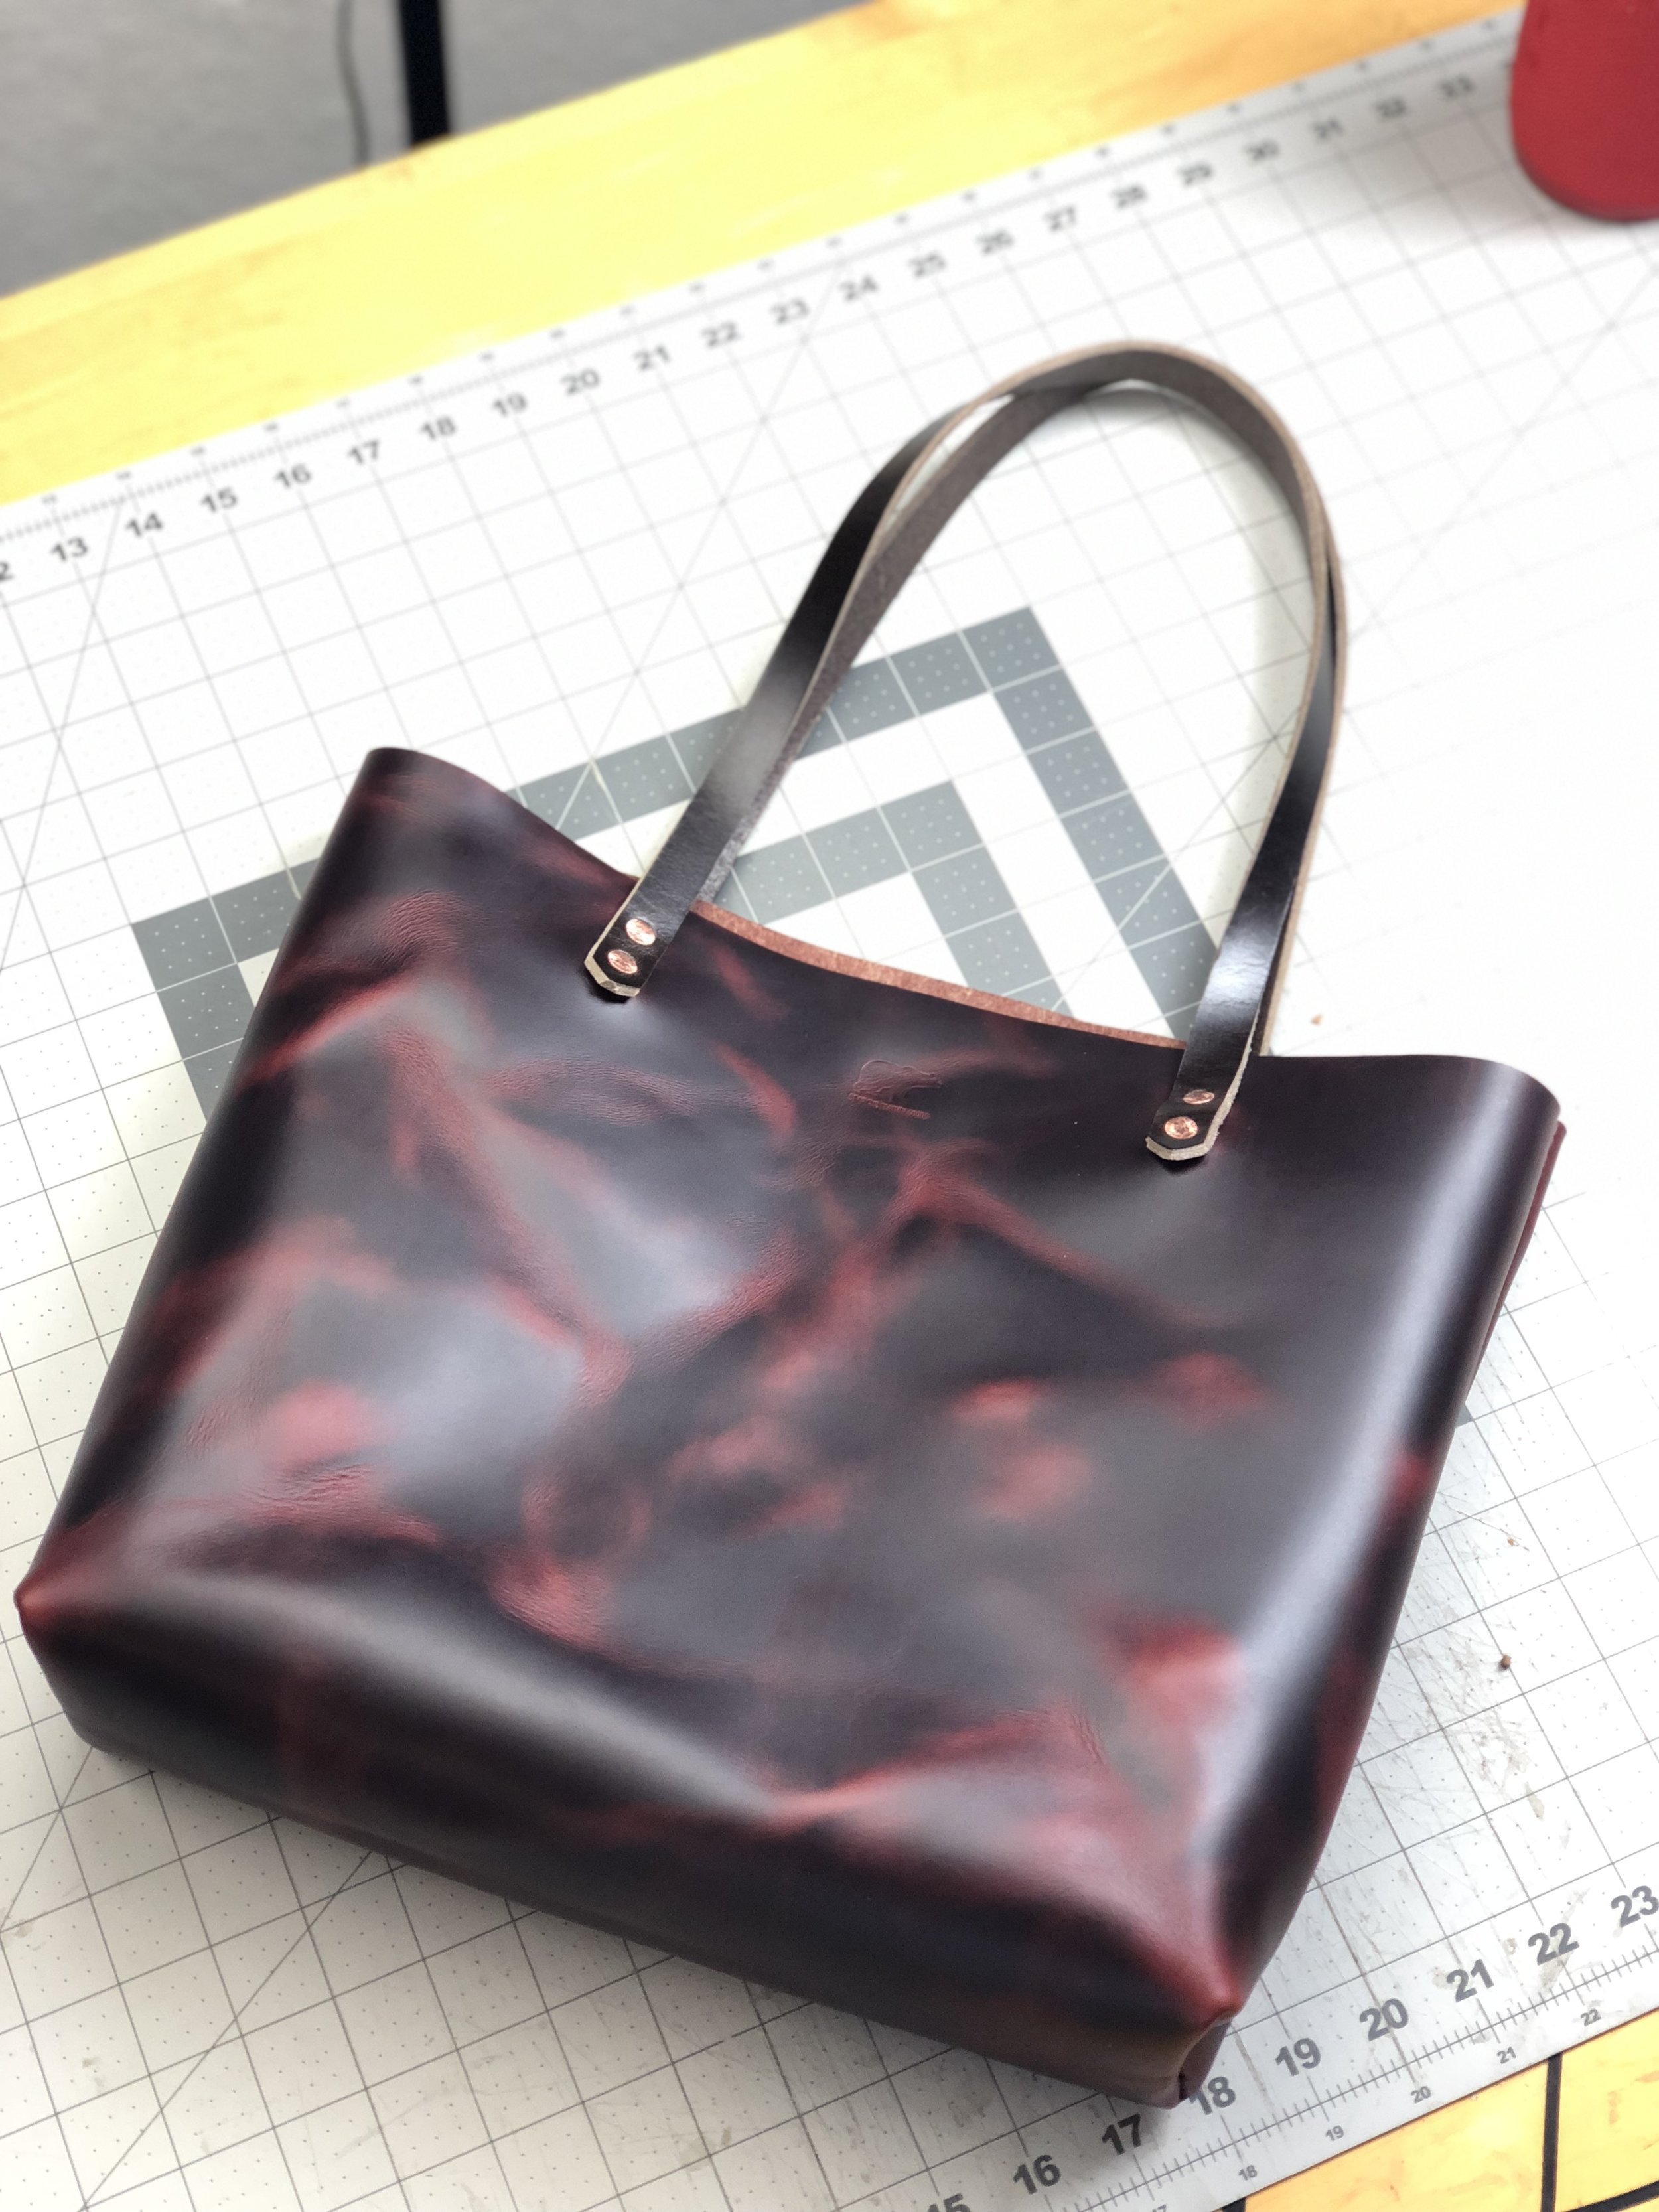 Handmade and stitched leather tote bag by Bear Cub Leather Goods